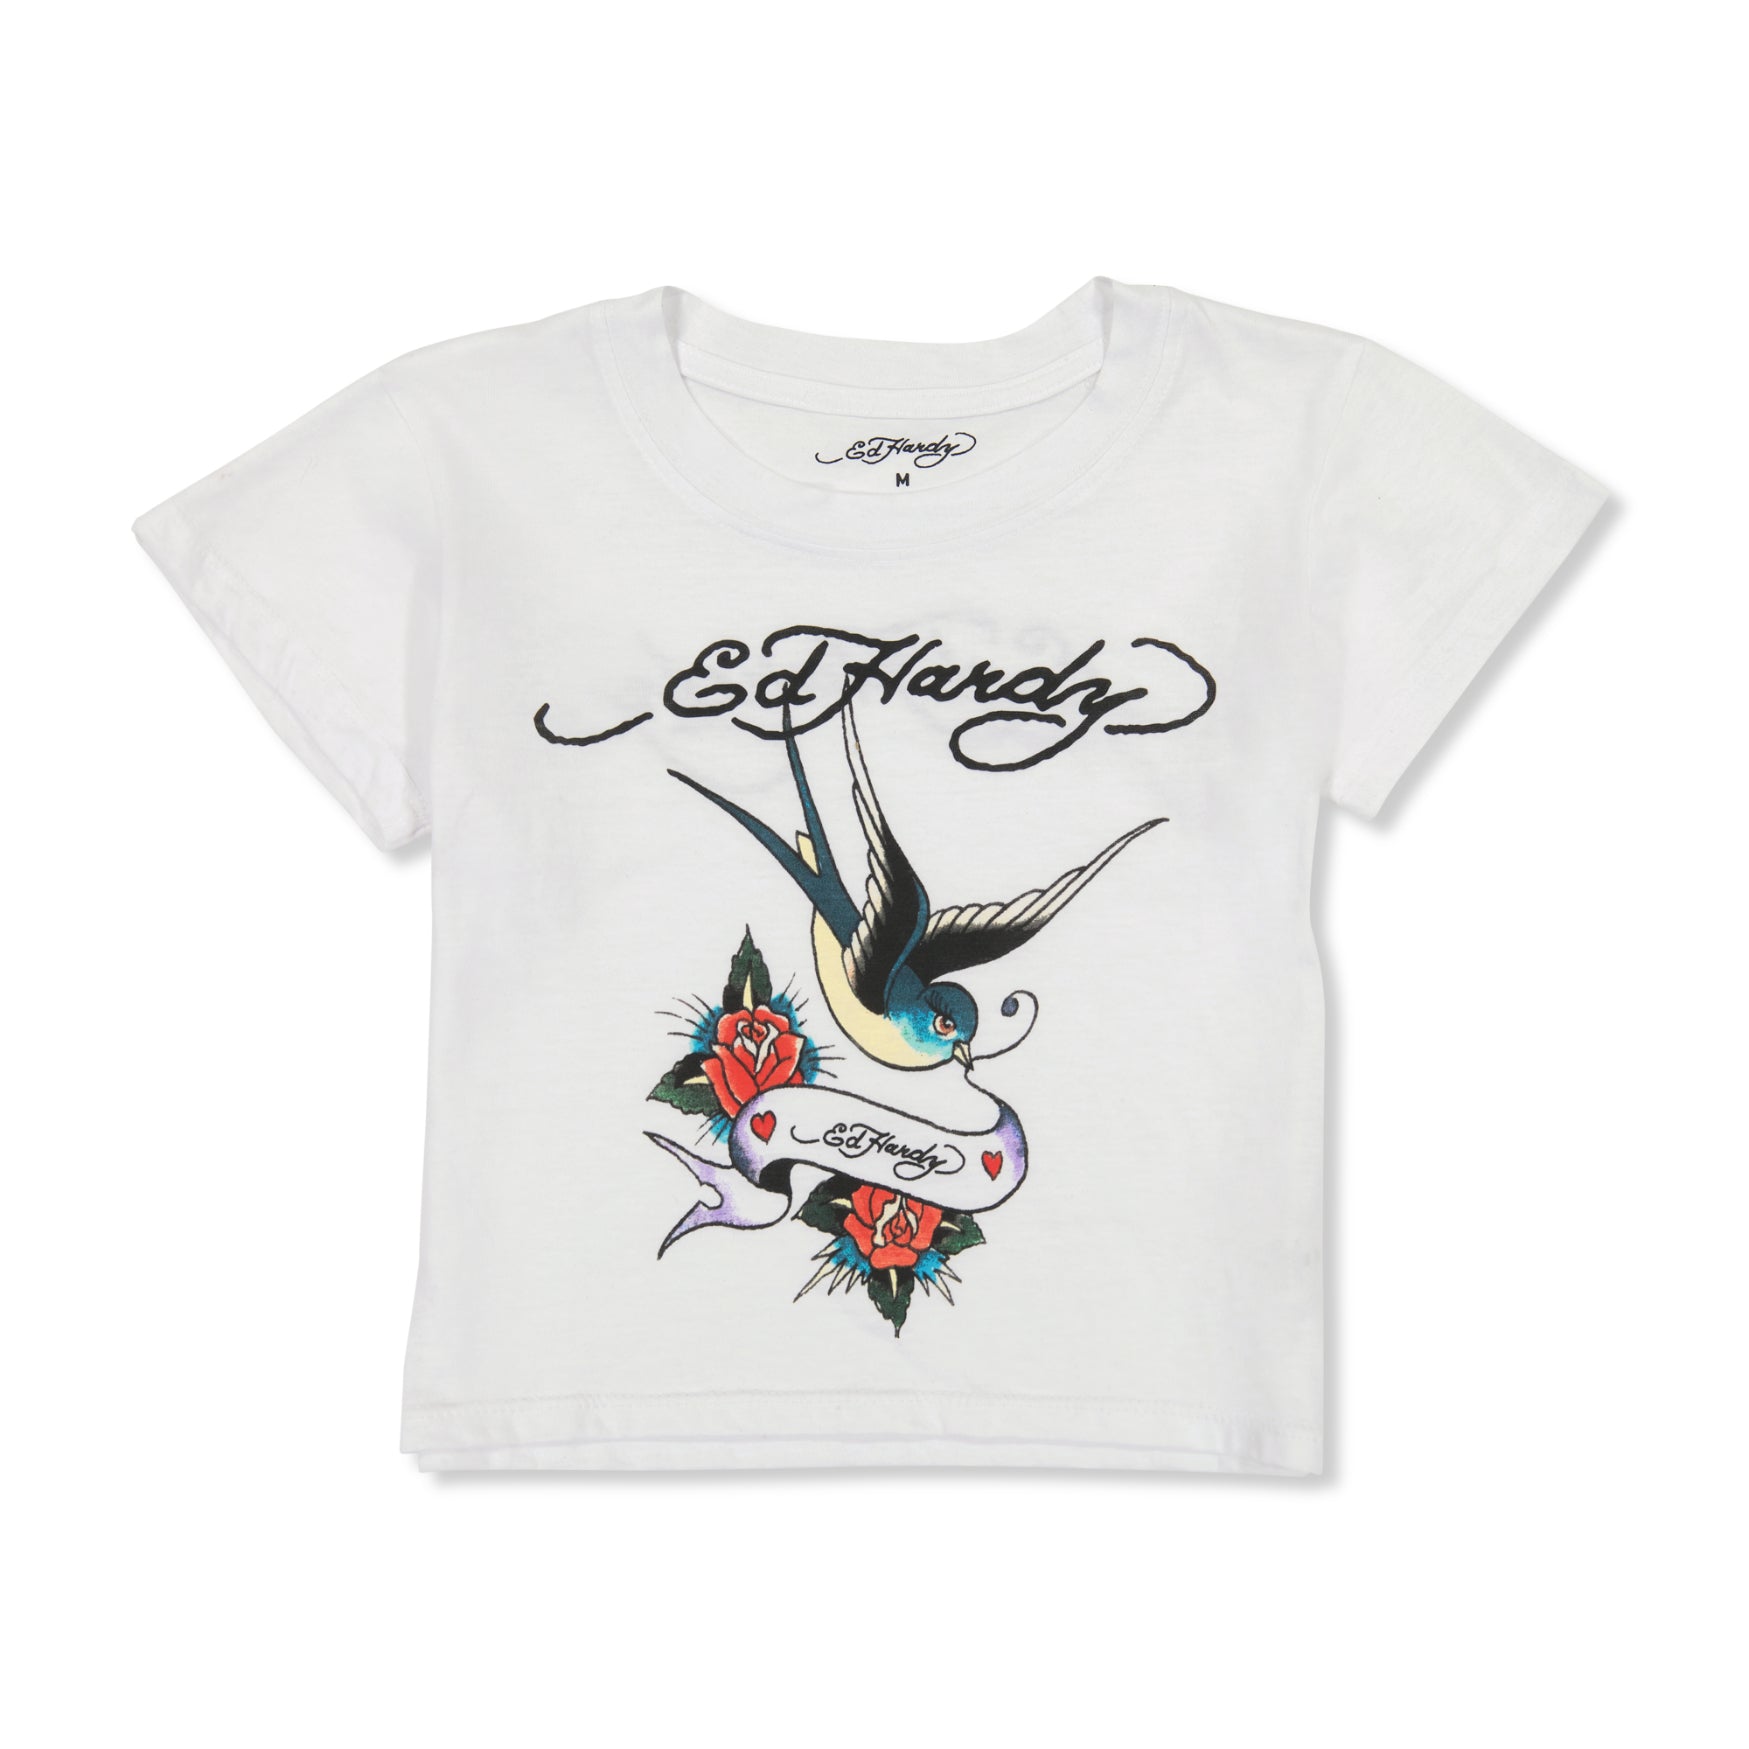 Ed Hardy baby tee with floral logo graphic